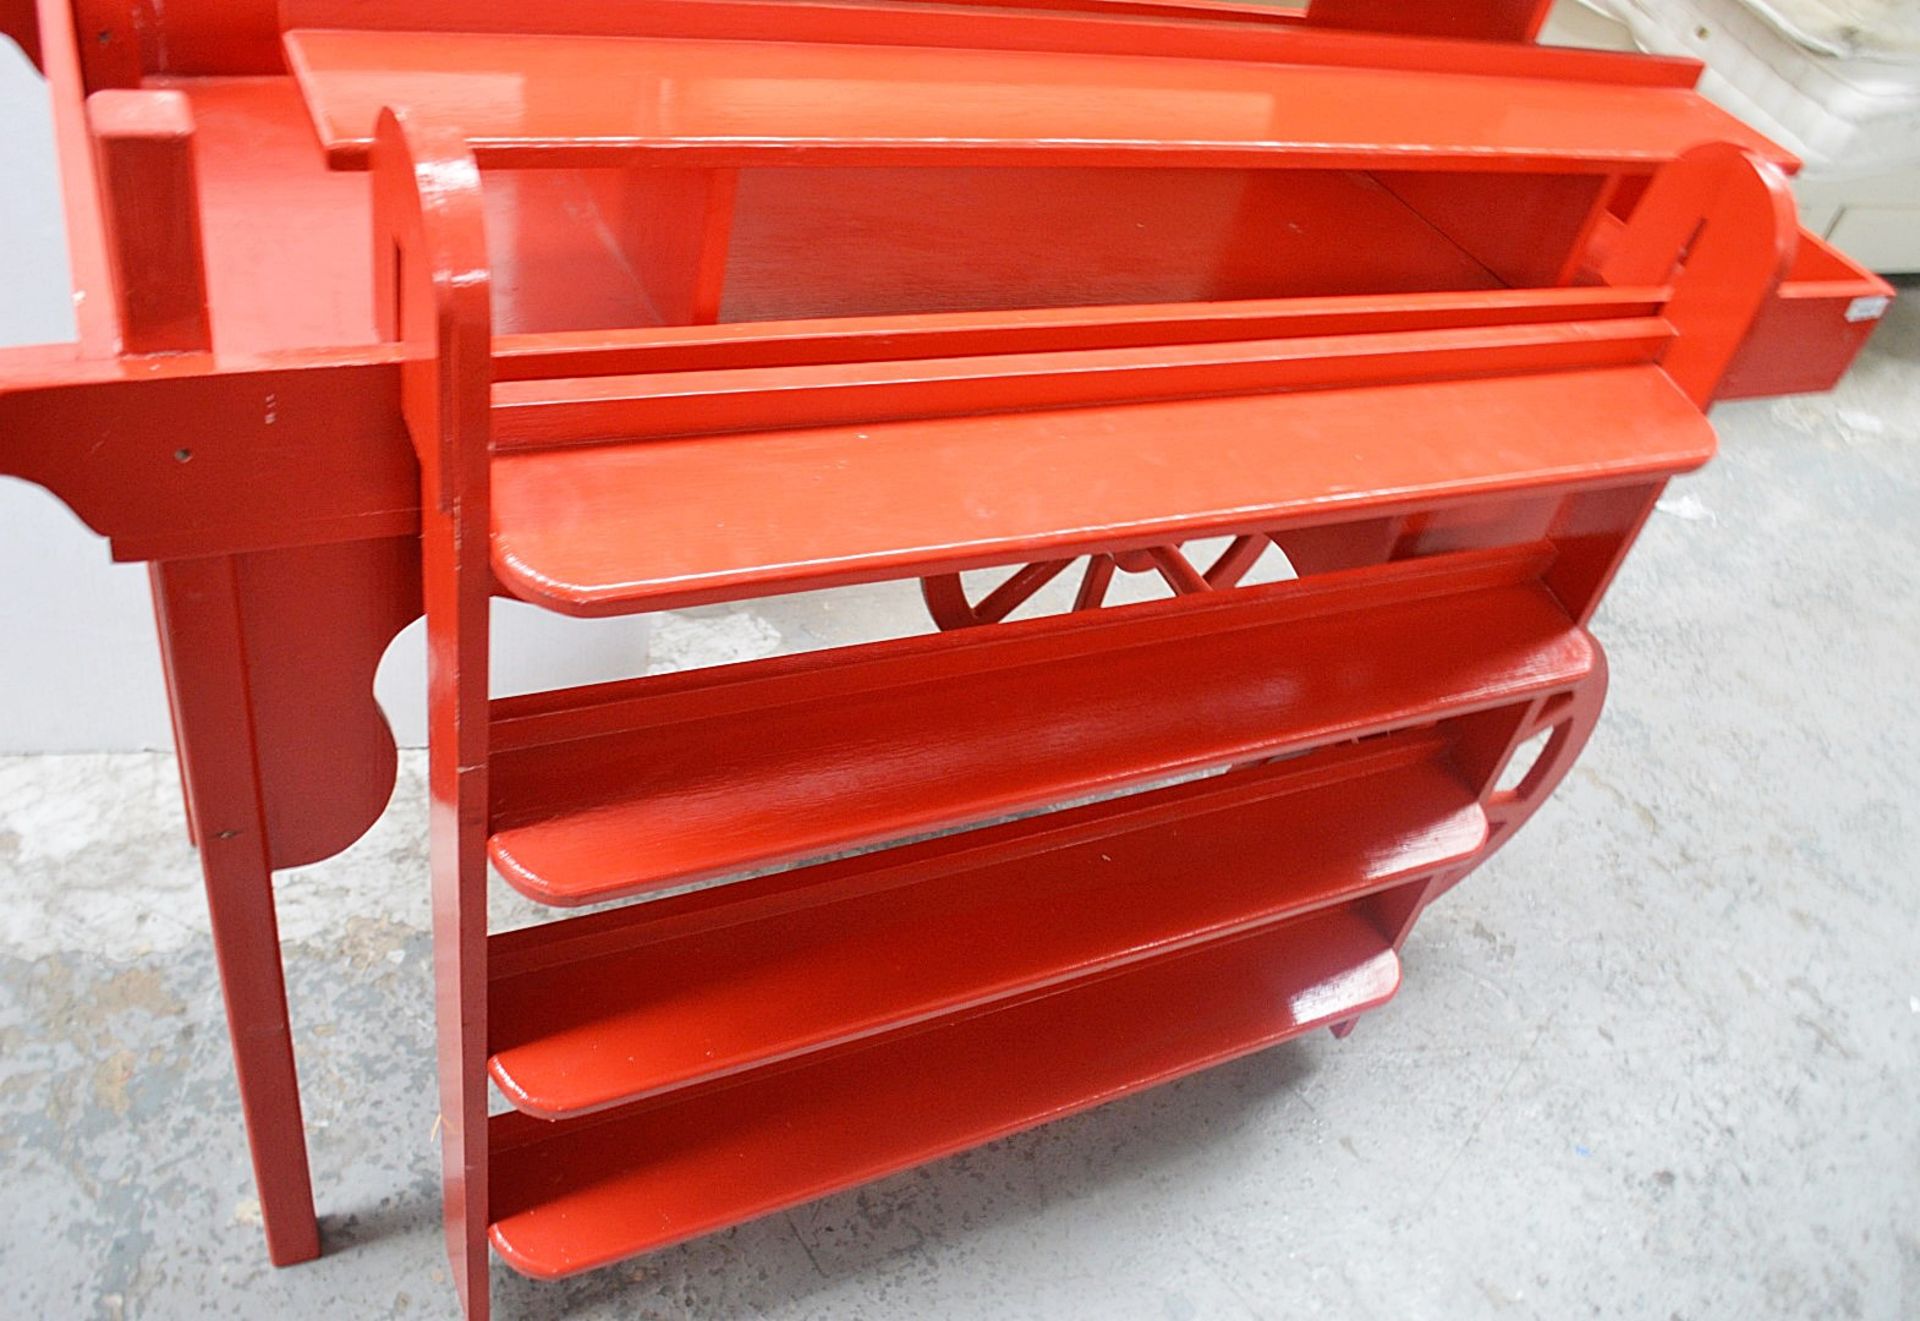 1 x NOOK Bespoke Wooden Display Retail Cart And Ladder In Red - Dimensions: H136 x W180 x D80cm - Image 3 of 5